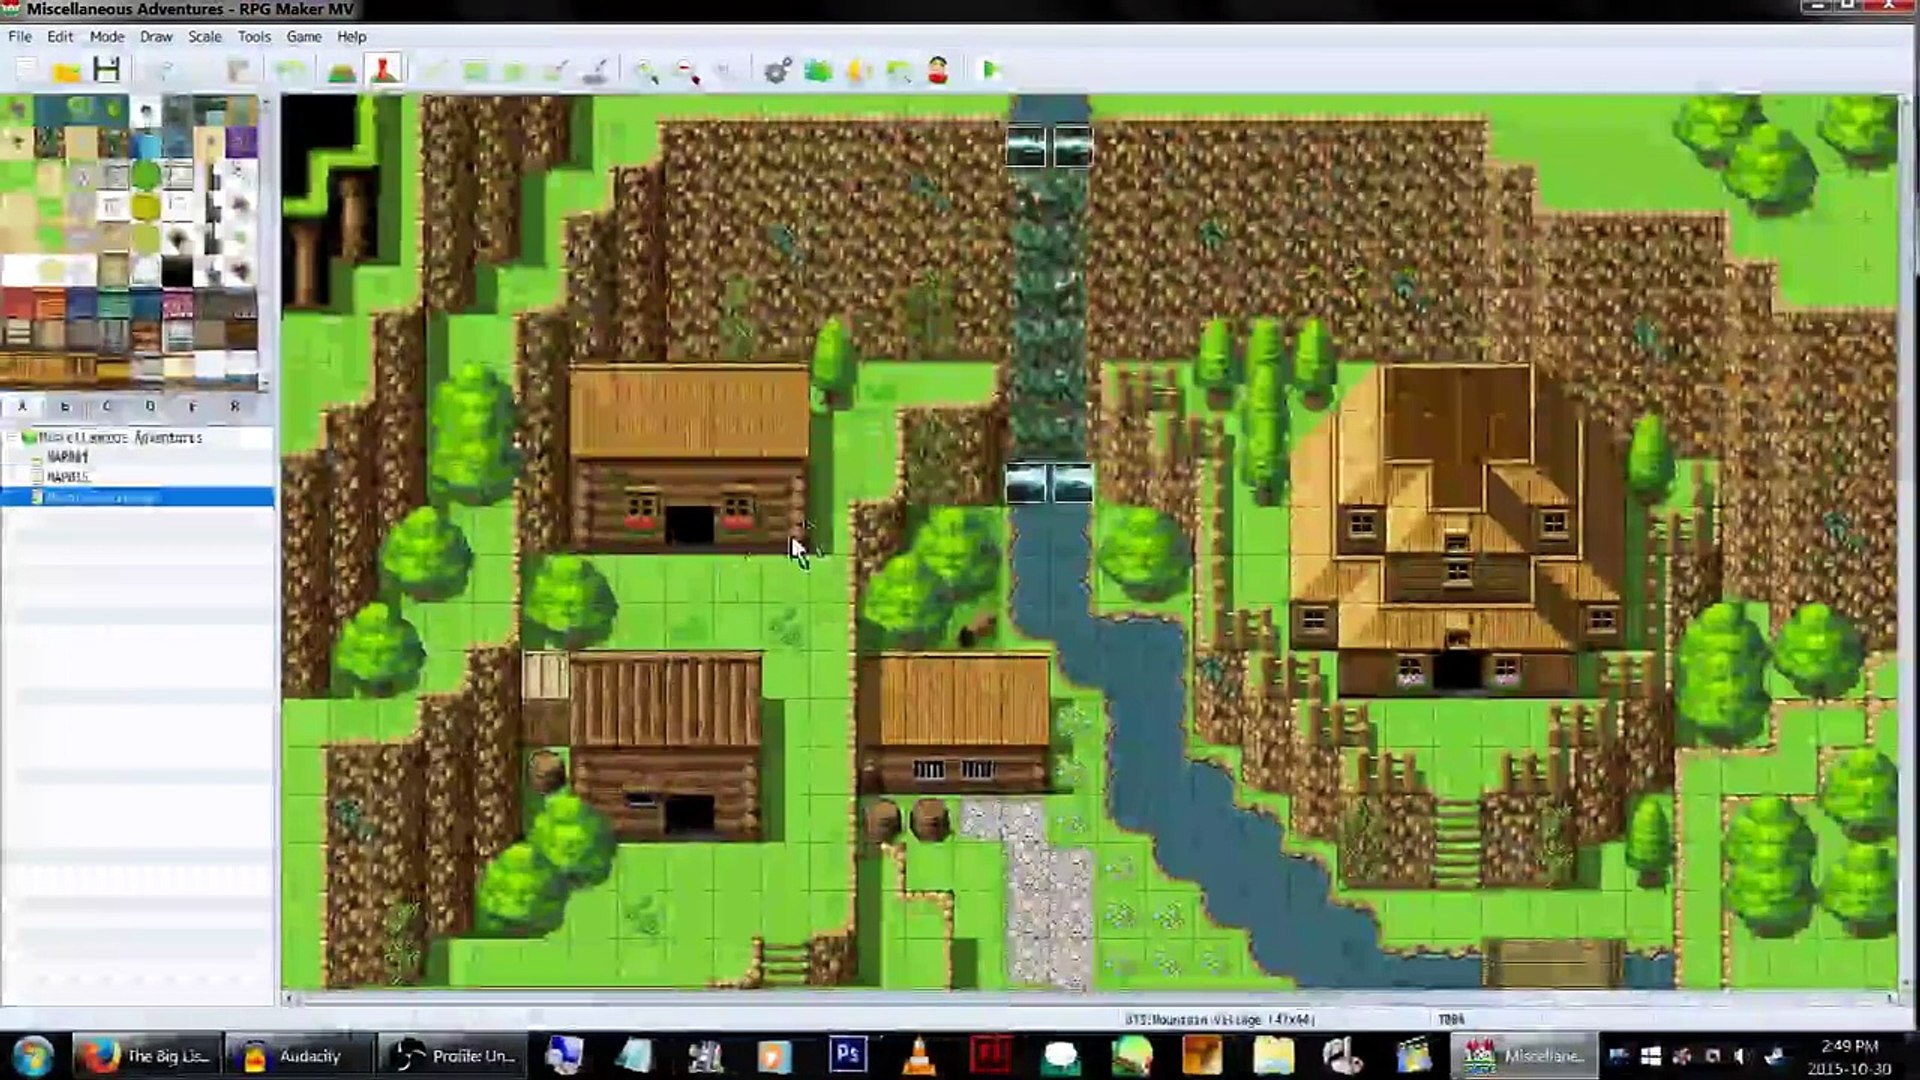 Rpg Maker Mv An Epic Journey Awaits Lets Make A Game Pt 1 Video Dailymotion